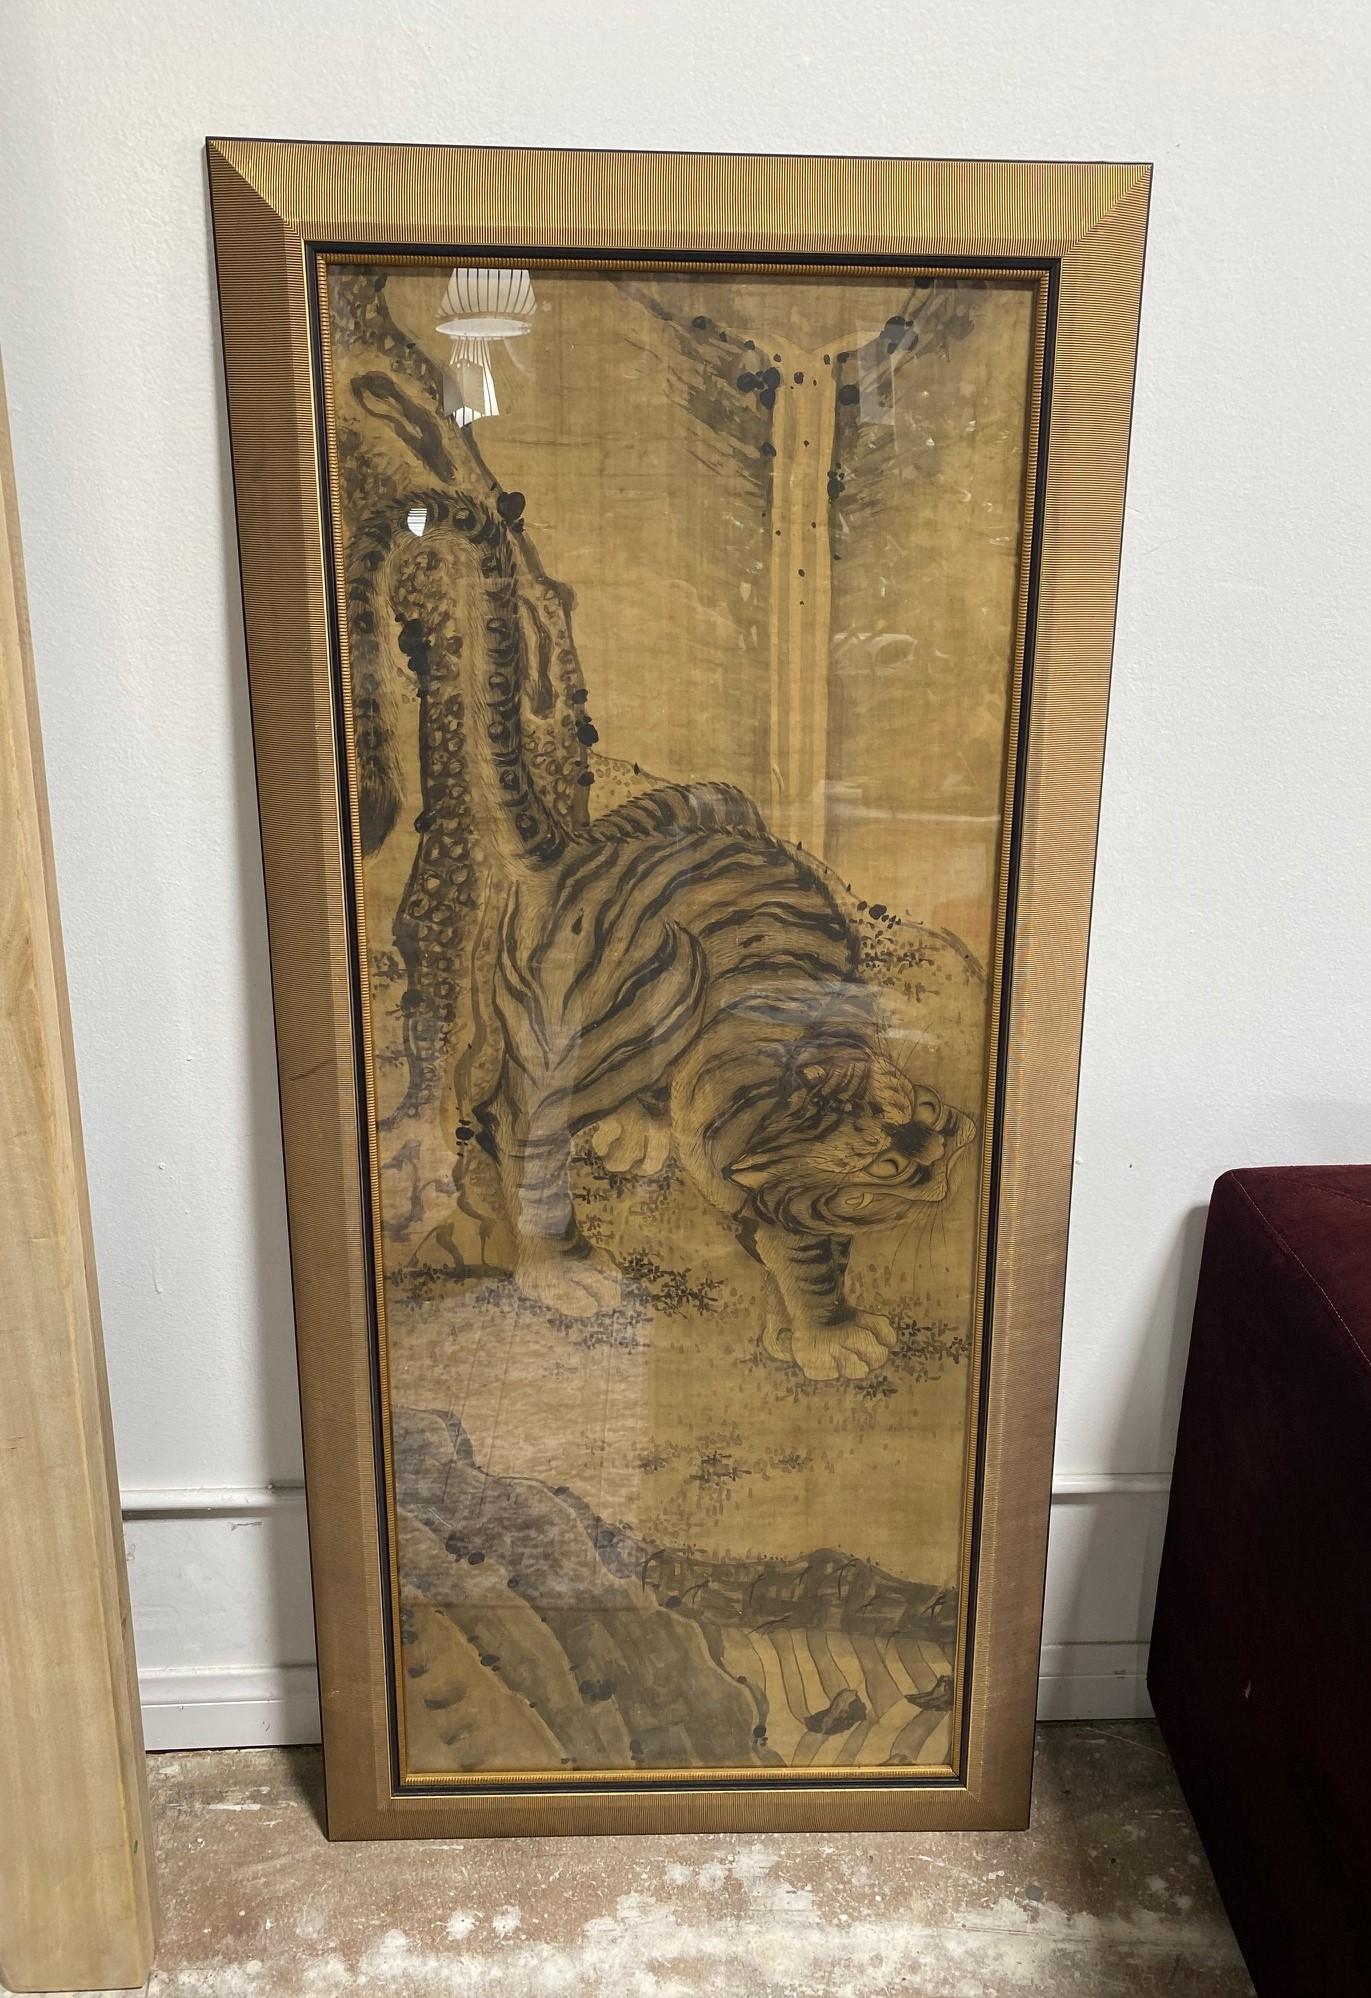 A beautiful and striking Japanese Edo period tiger scroll. Hand-painted with masterful brushstrokes on a silk surface. Wonderfully captured and composed with a hint of mischief. 

This work was acquired along with another who we believe could be